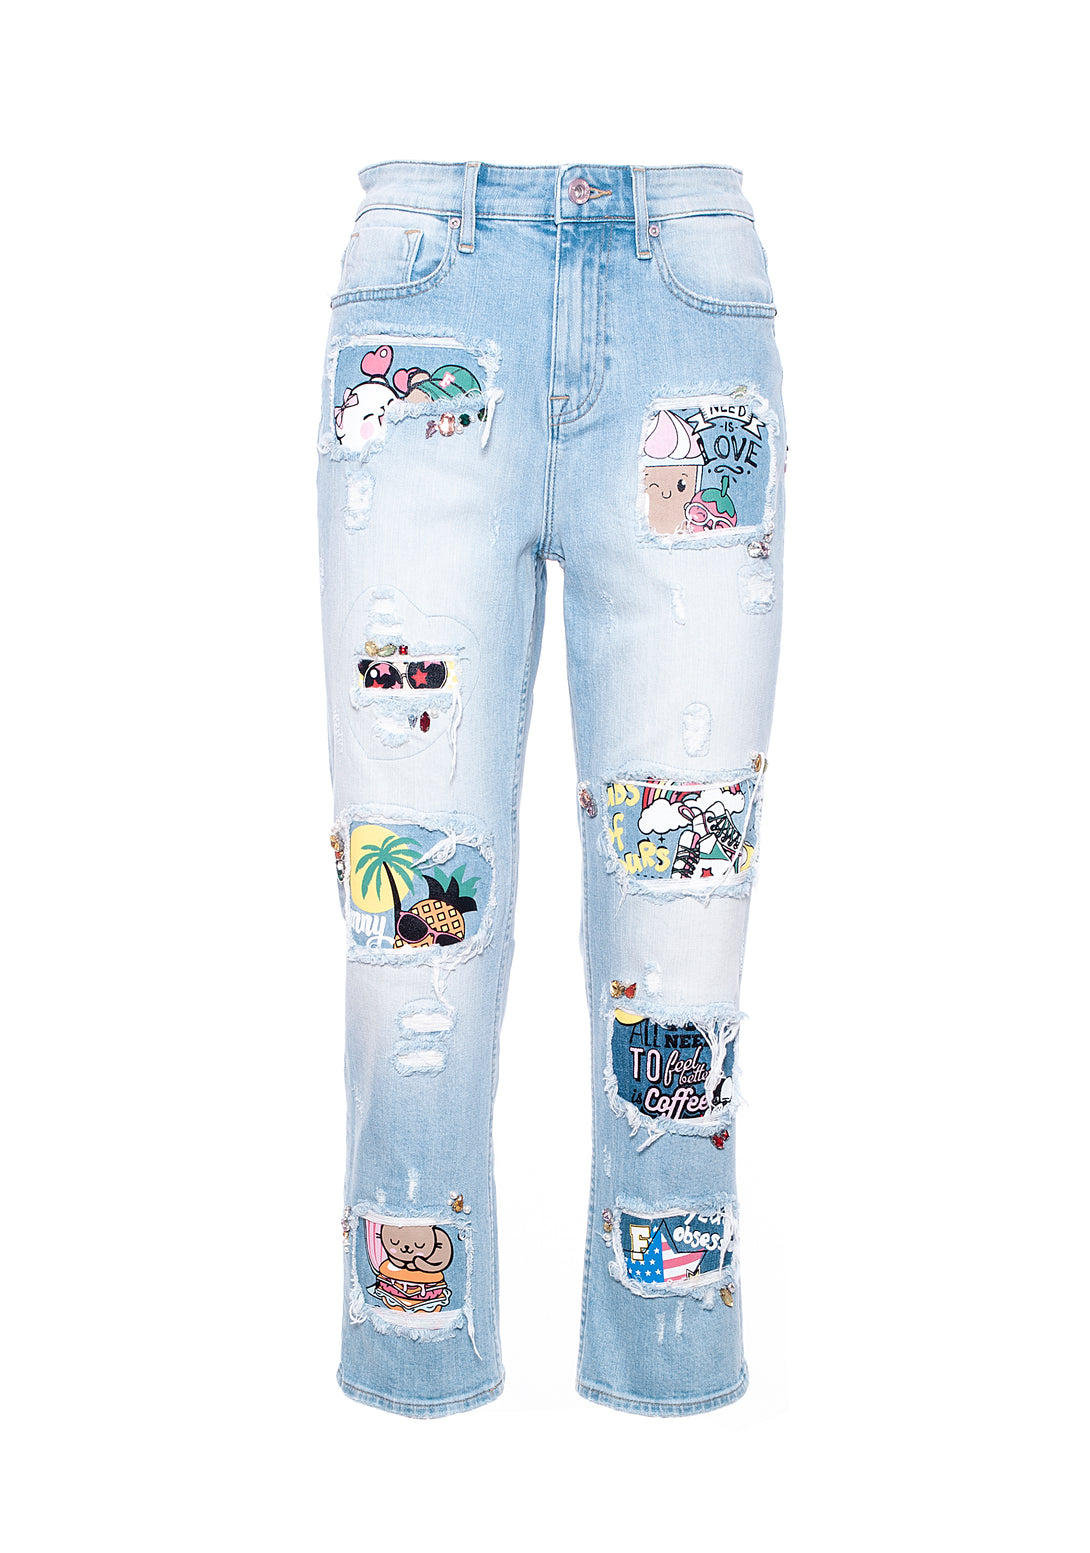 Jeans cropped fit made in stretch denim with light wash and patches